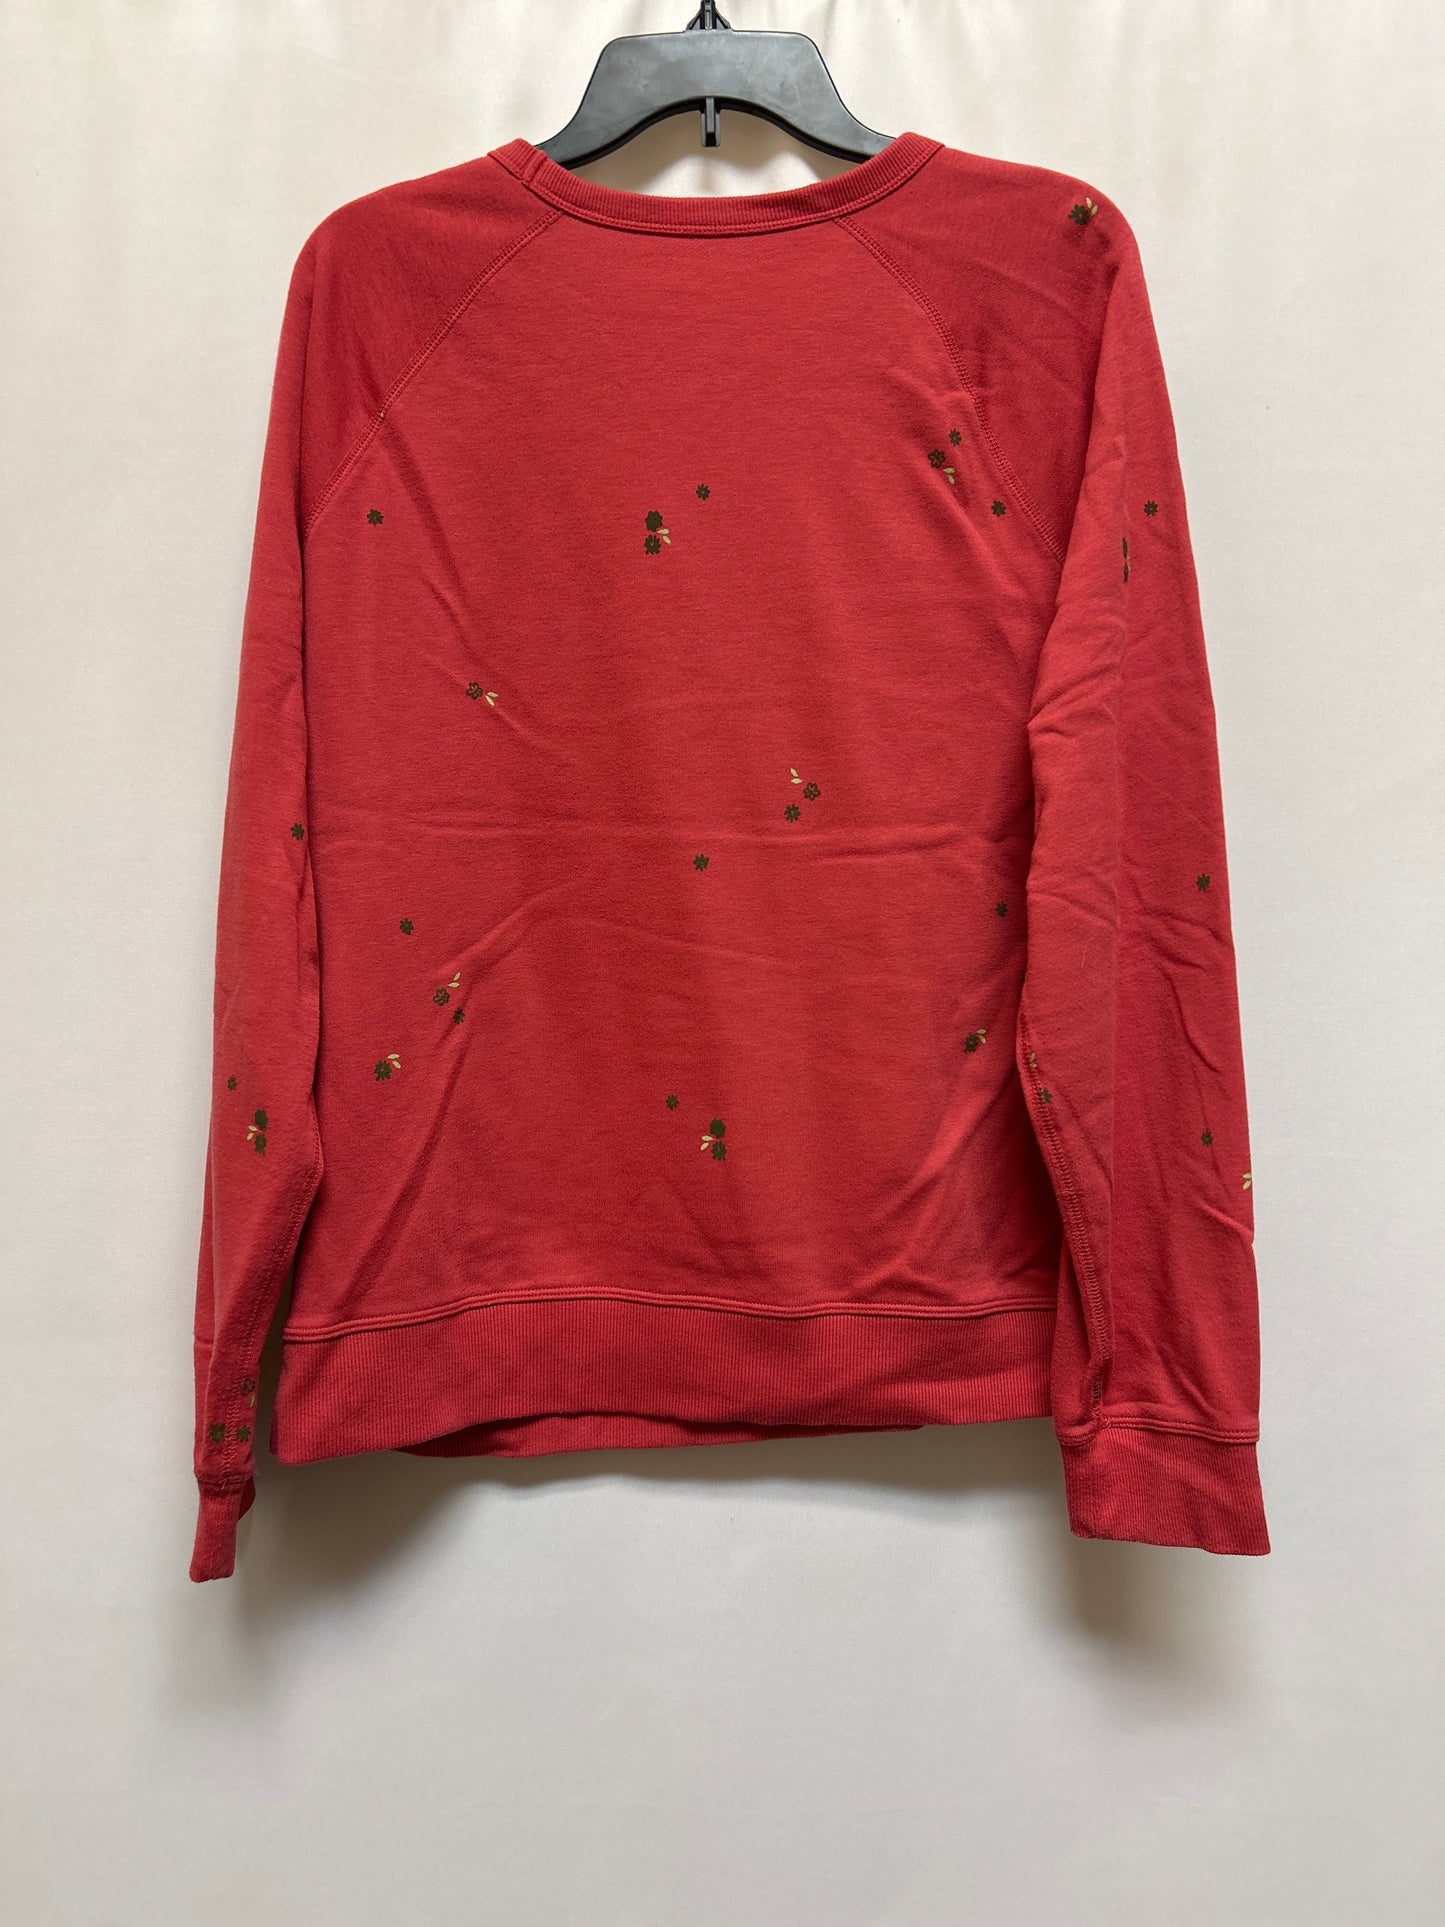 Top Long Sleeve By Sonoma  Size: Xl